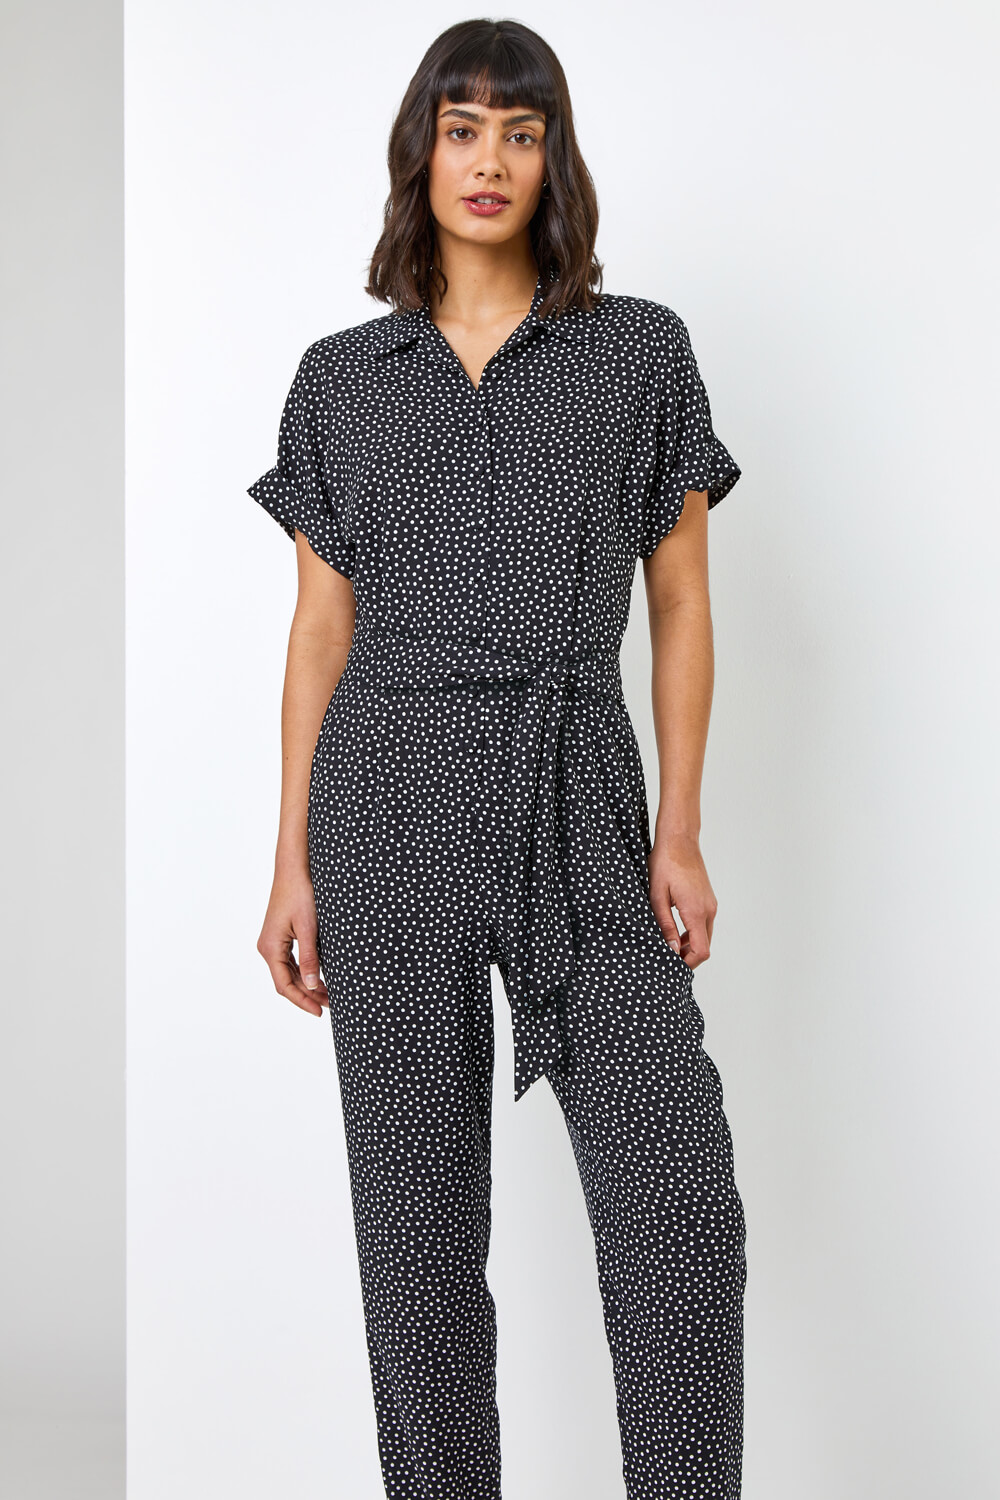 Black Spot Print Collared Jumpsuit, Image 2 of 5